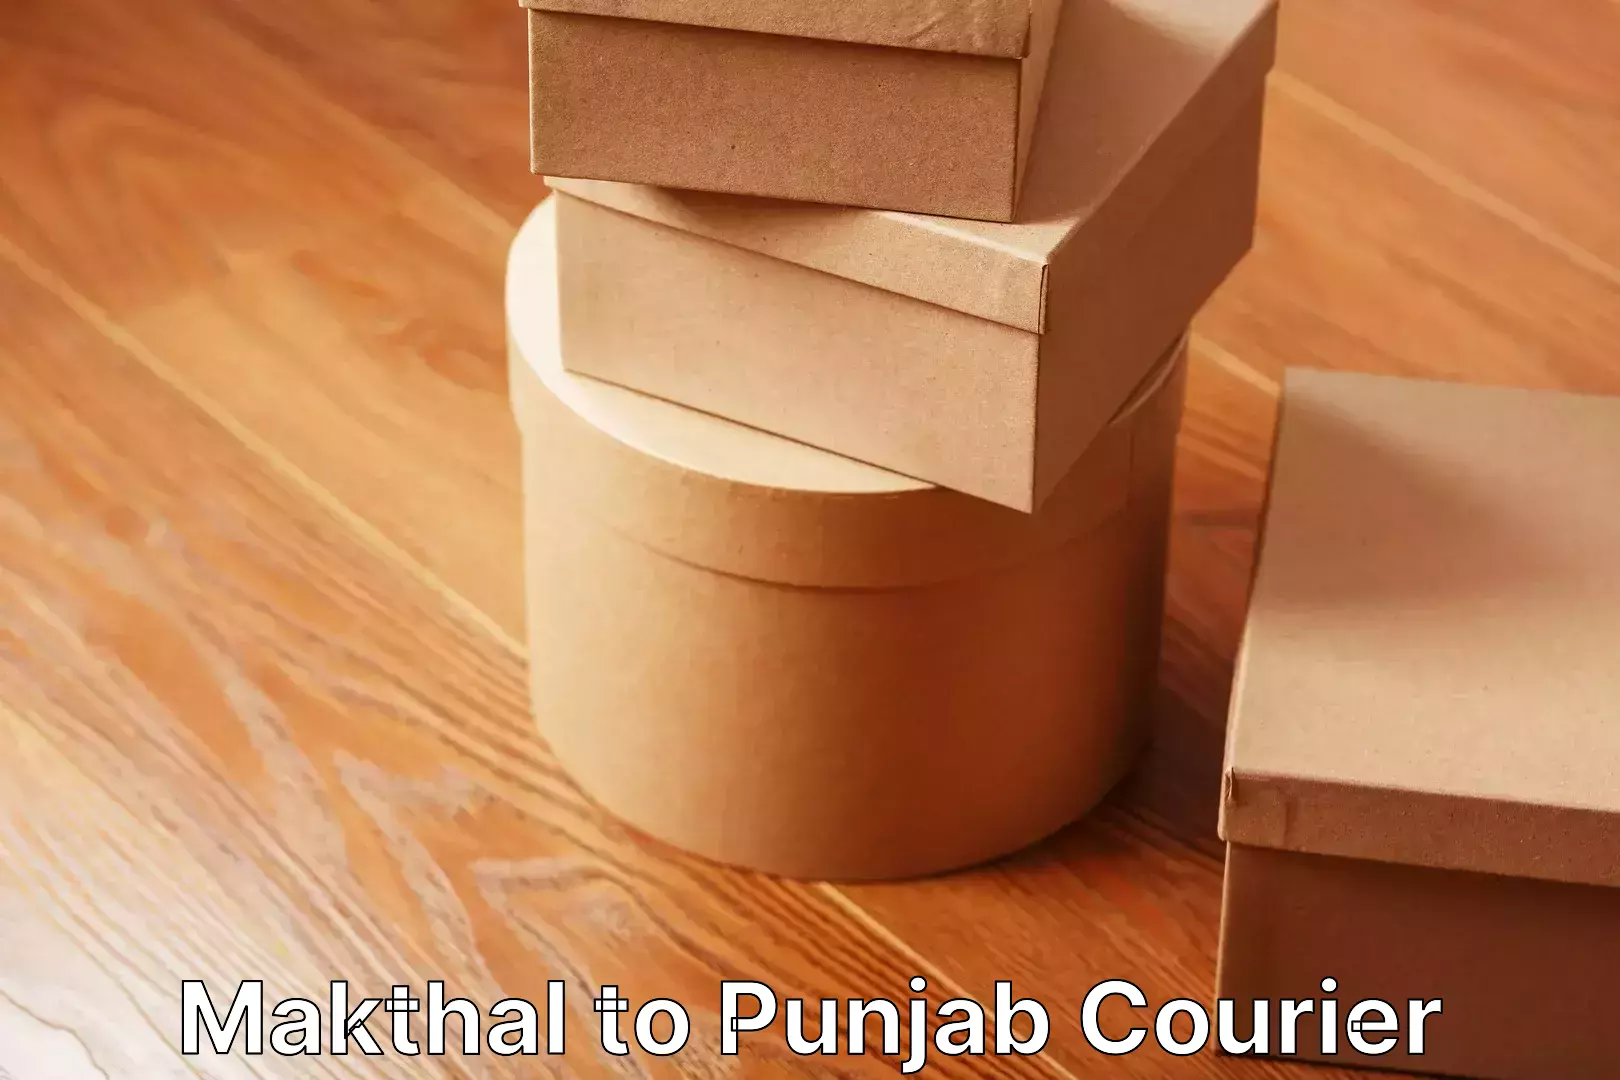 Moving and packing experts Makthal to Punjab